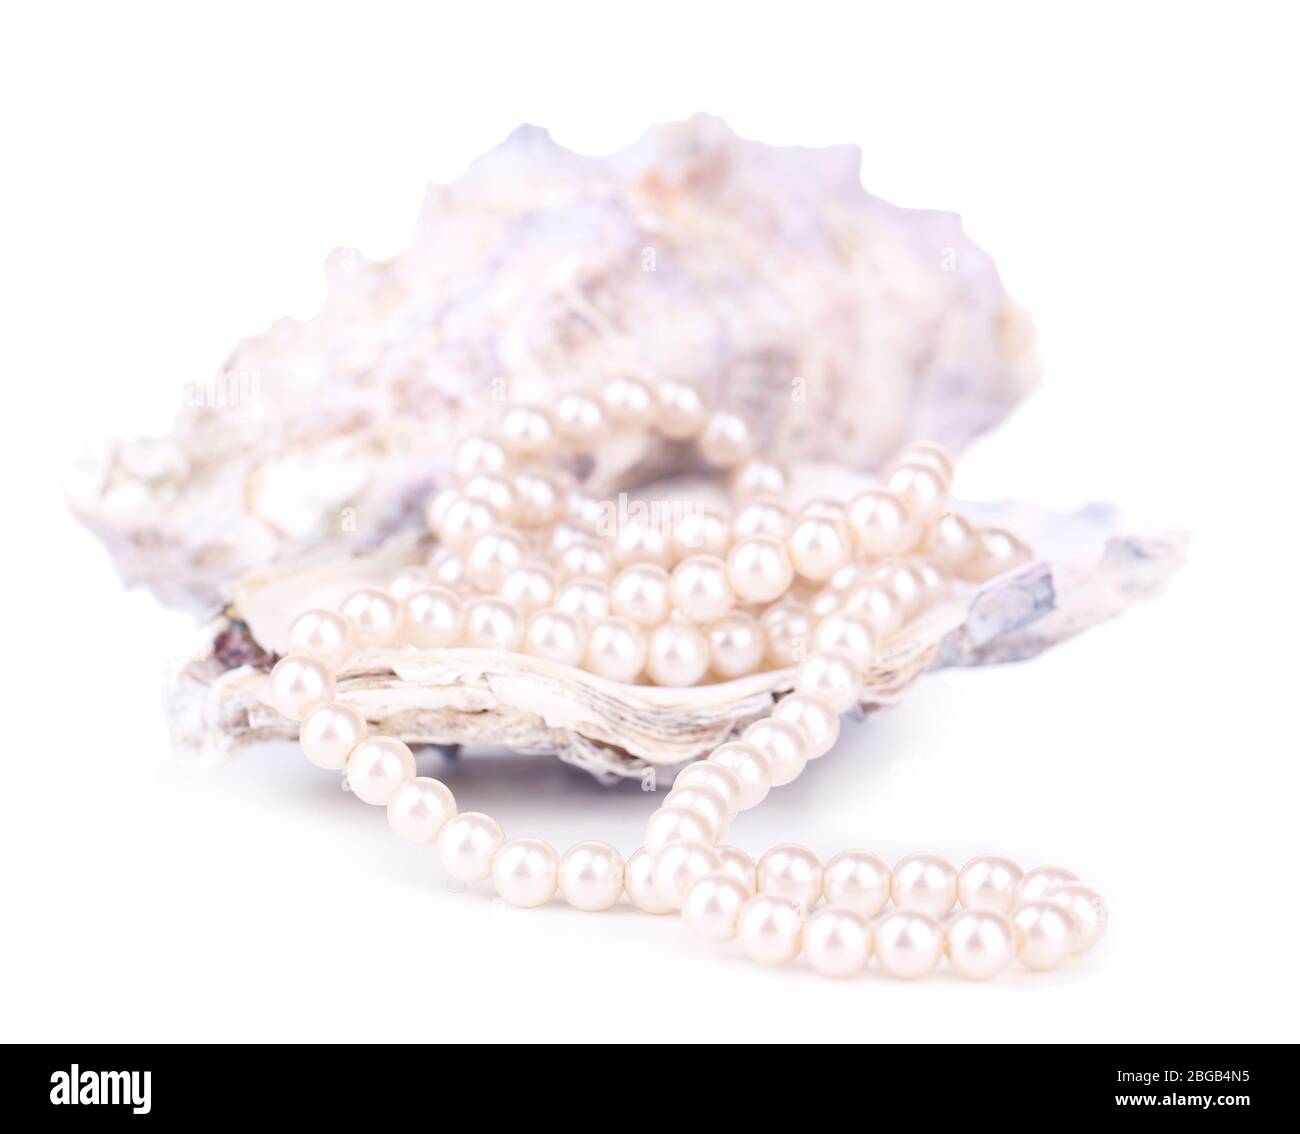 Shell with pearls, isolated on white Stock Photo